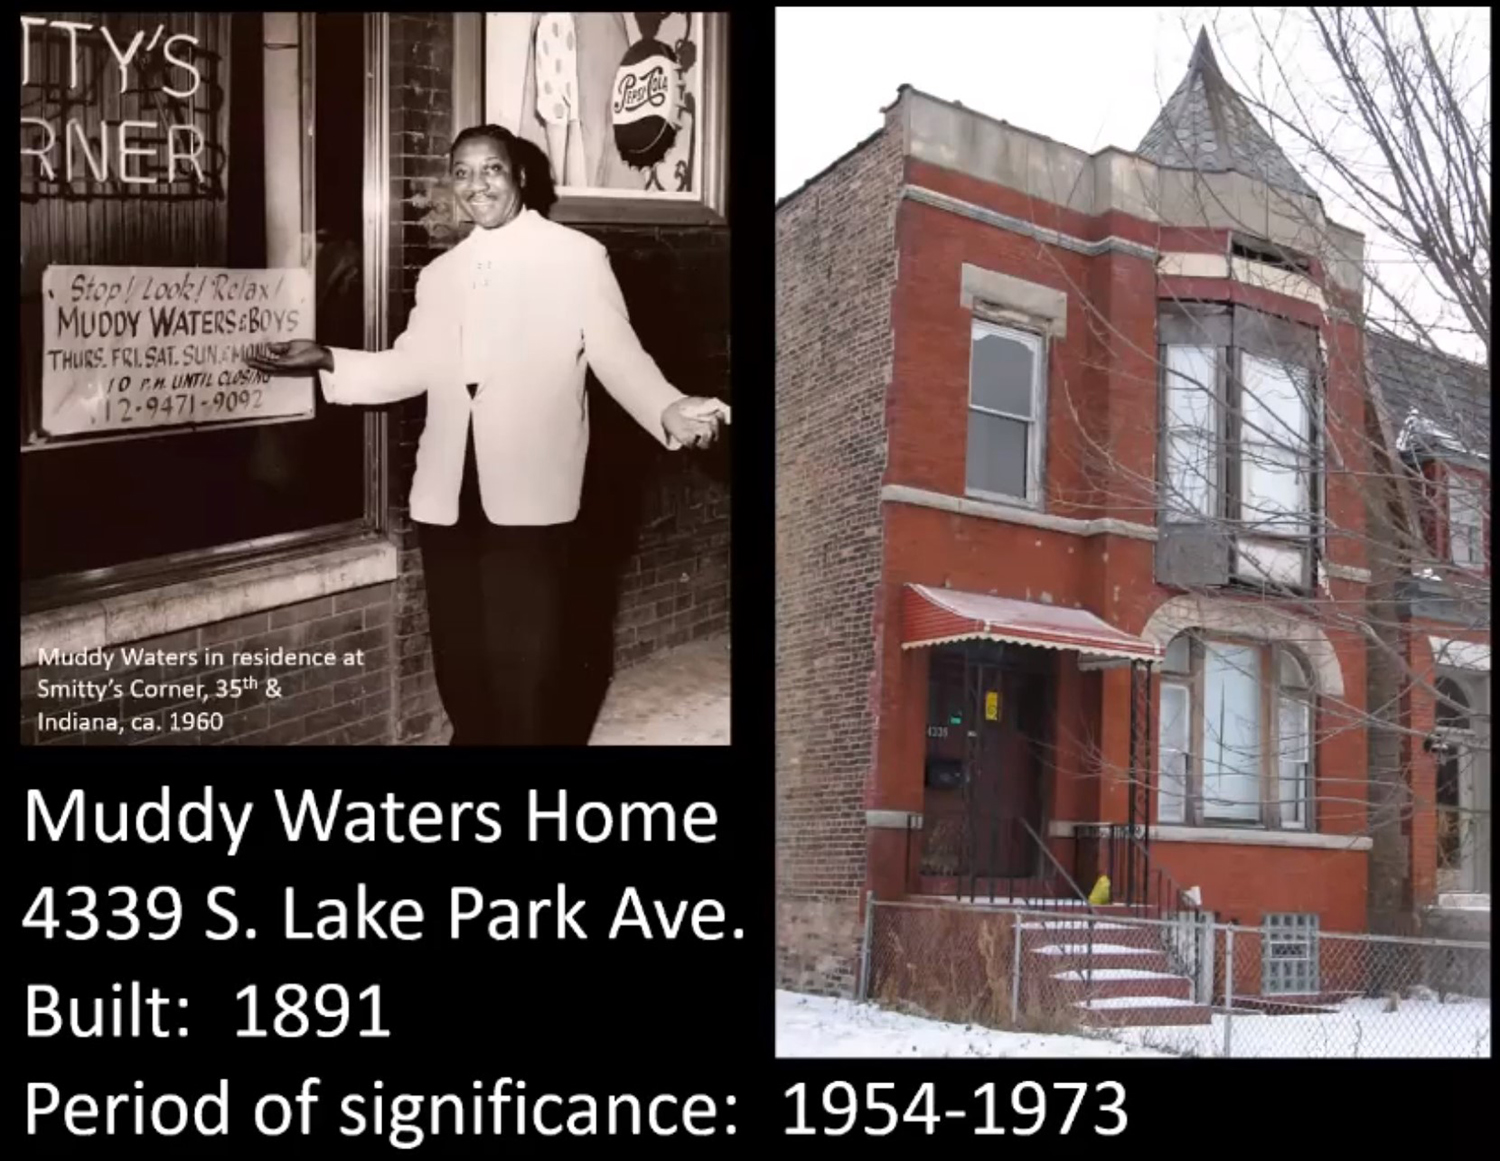 Muddy Waters House at 4339 S Lake Park Avenue. Images by CCL